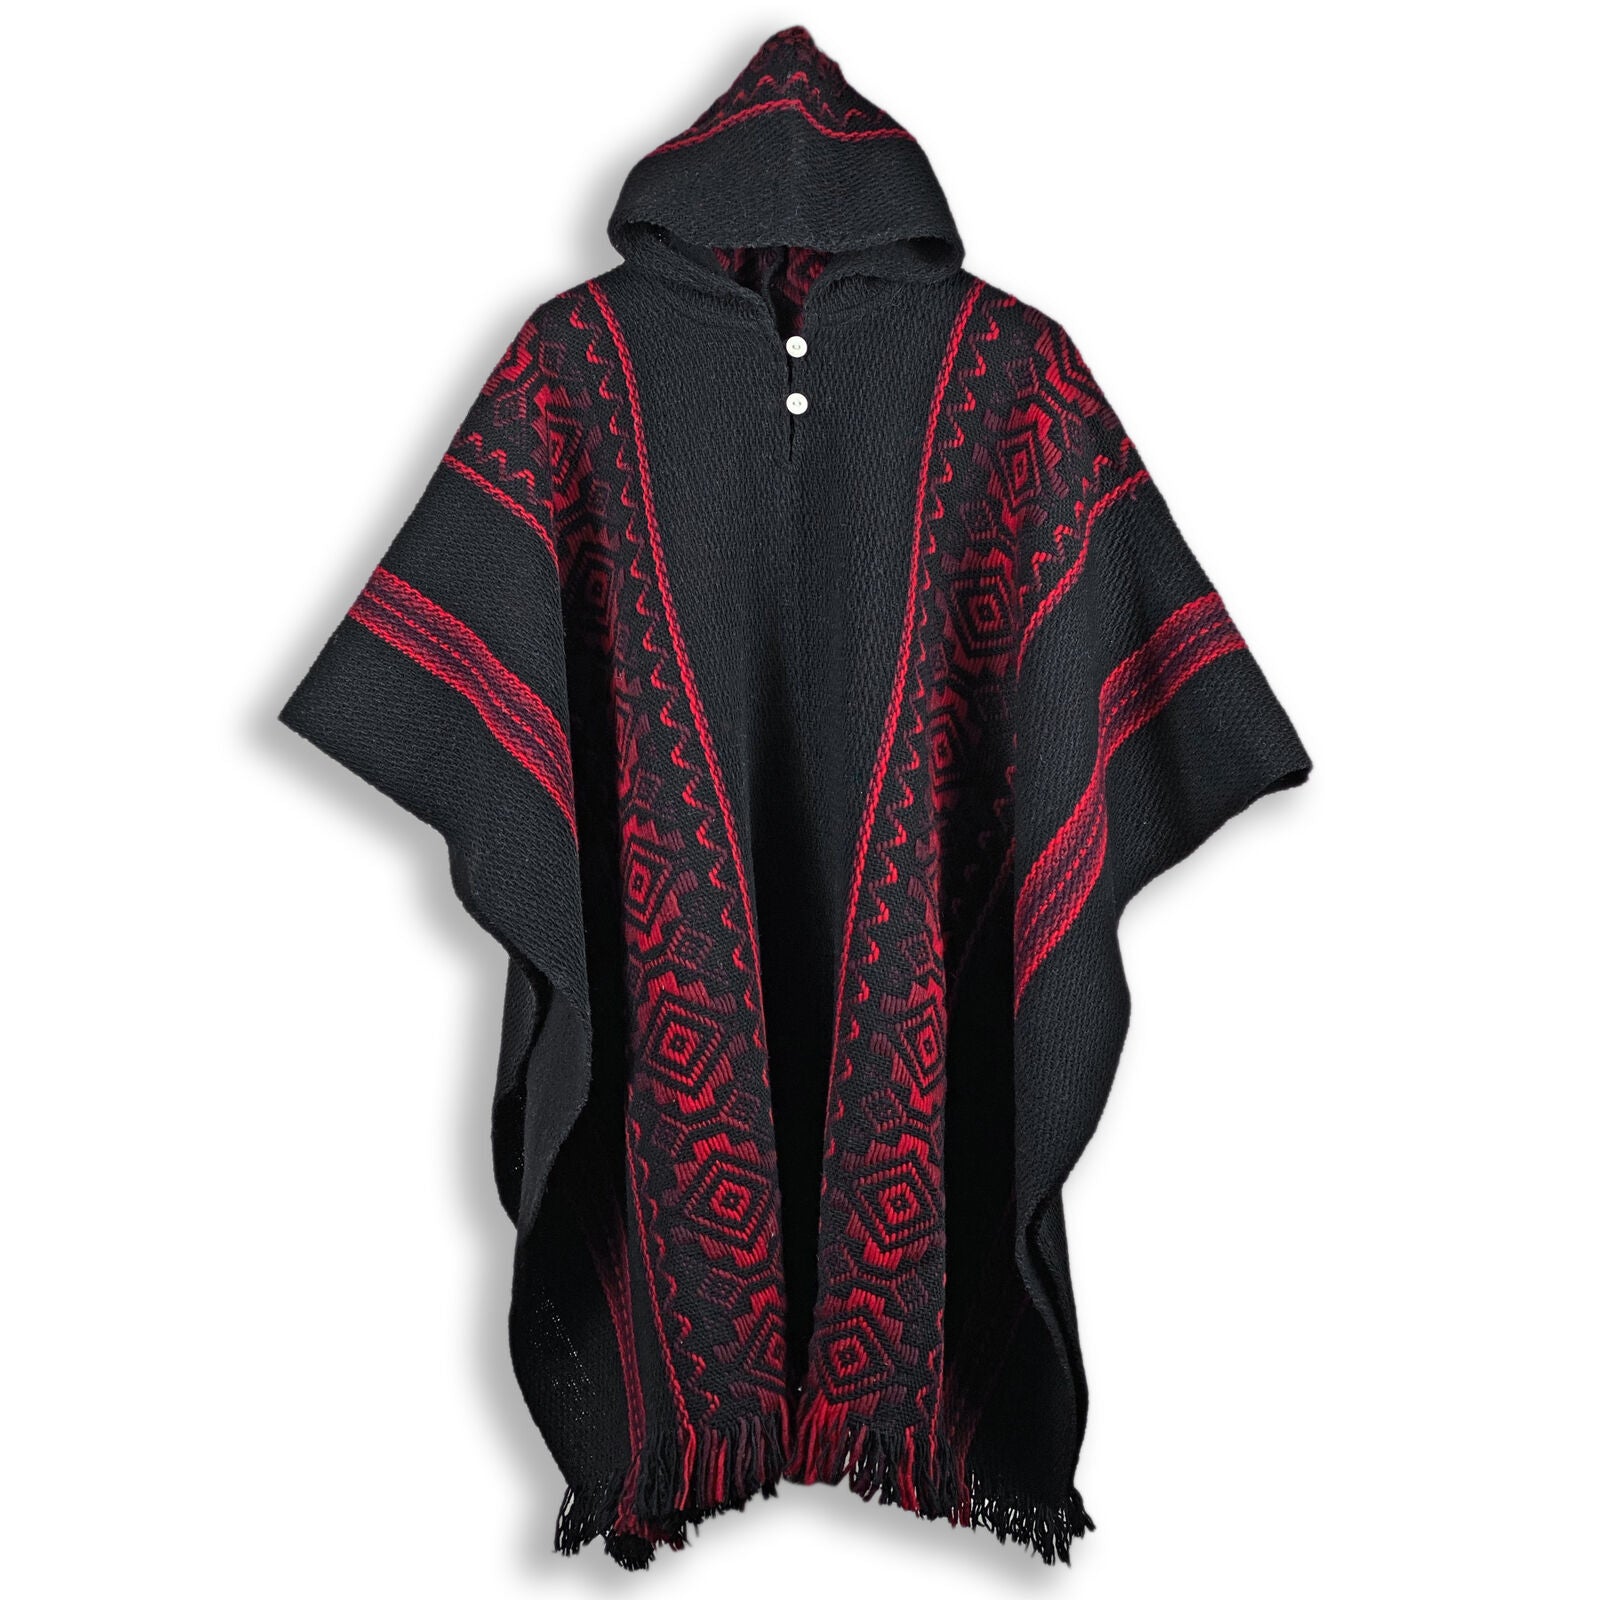 Unisex South American Handwoven Hooded Poncho - solid black with red diamonds pattern